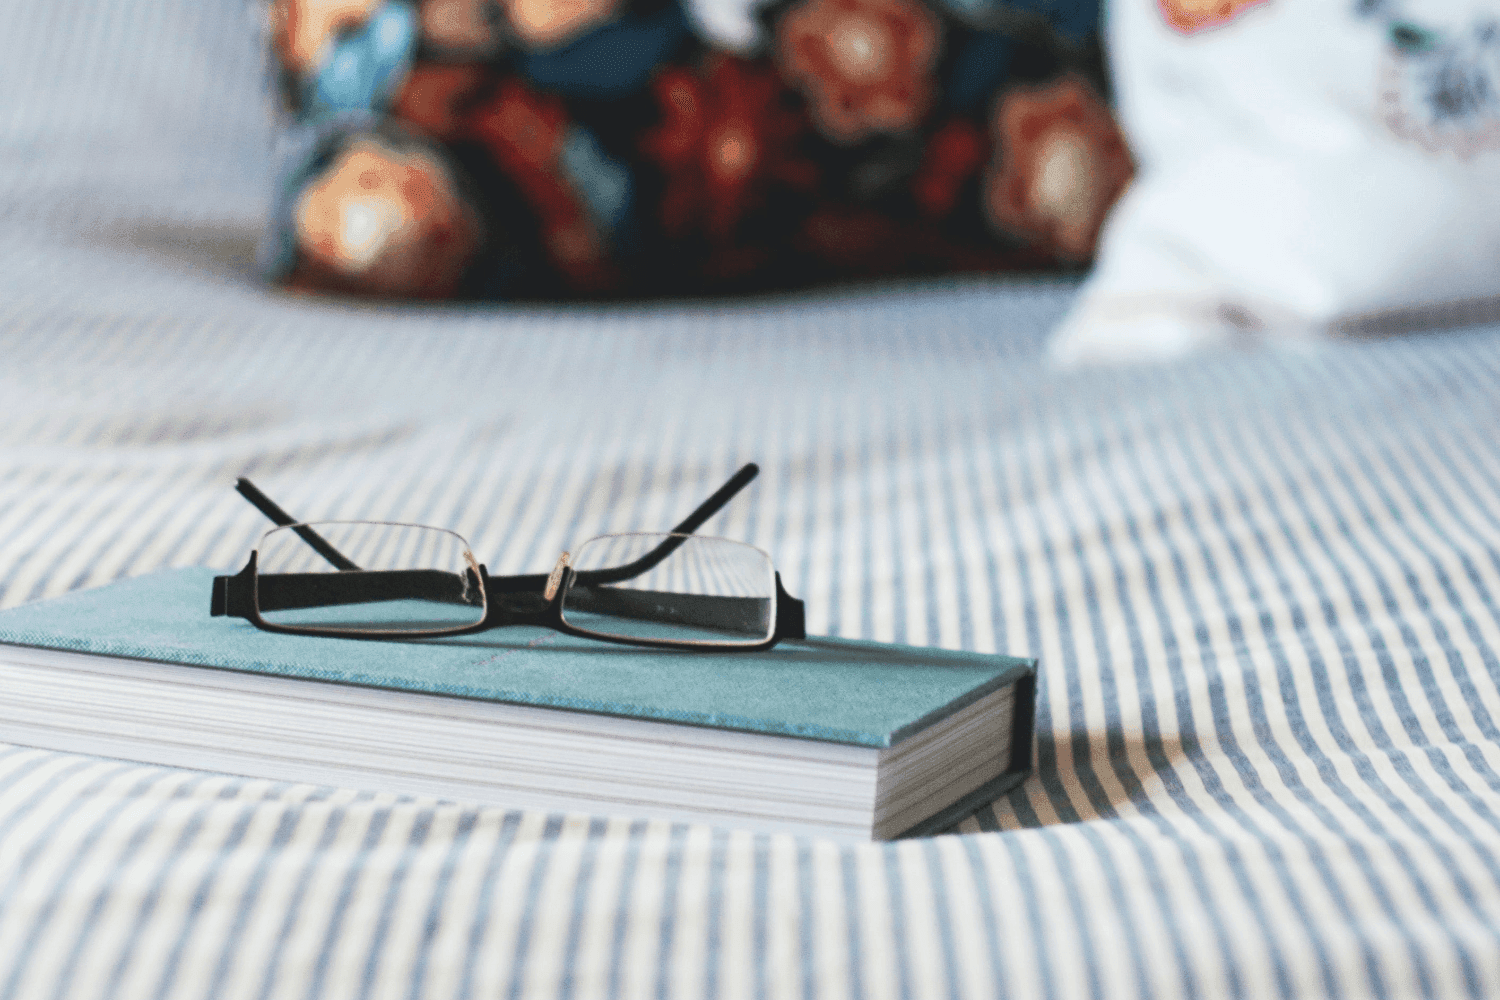 book on blue and white striped bed sheets with pair of glasses on top upside down